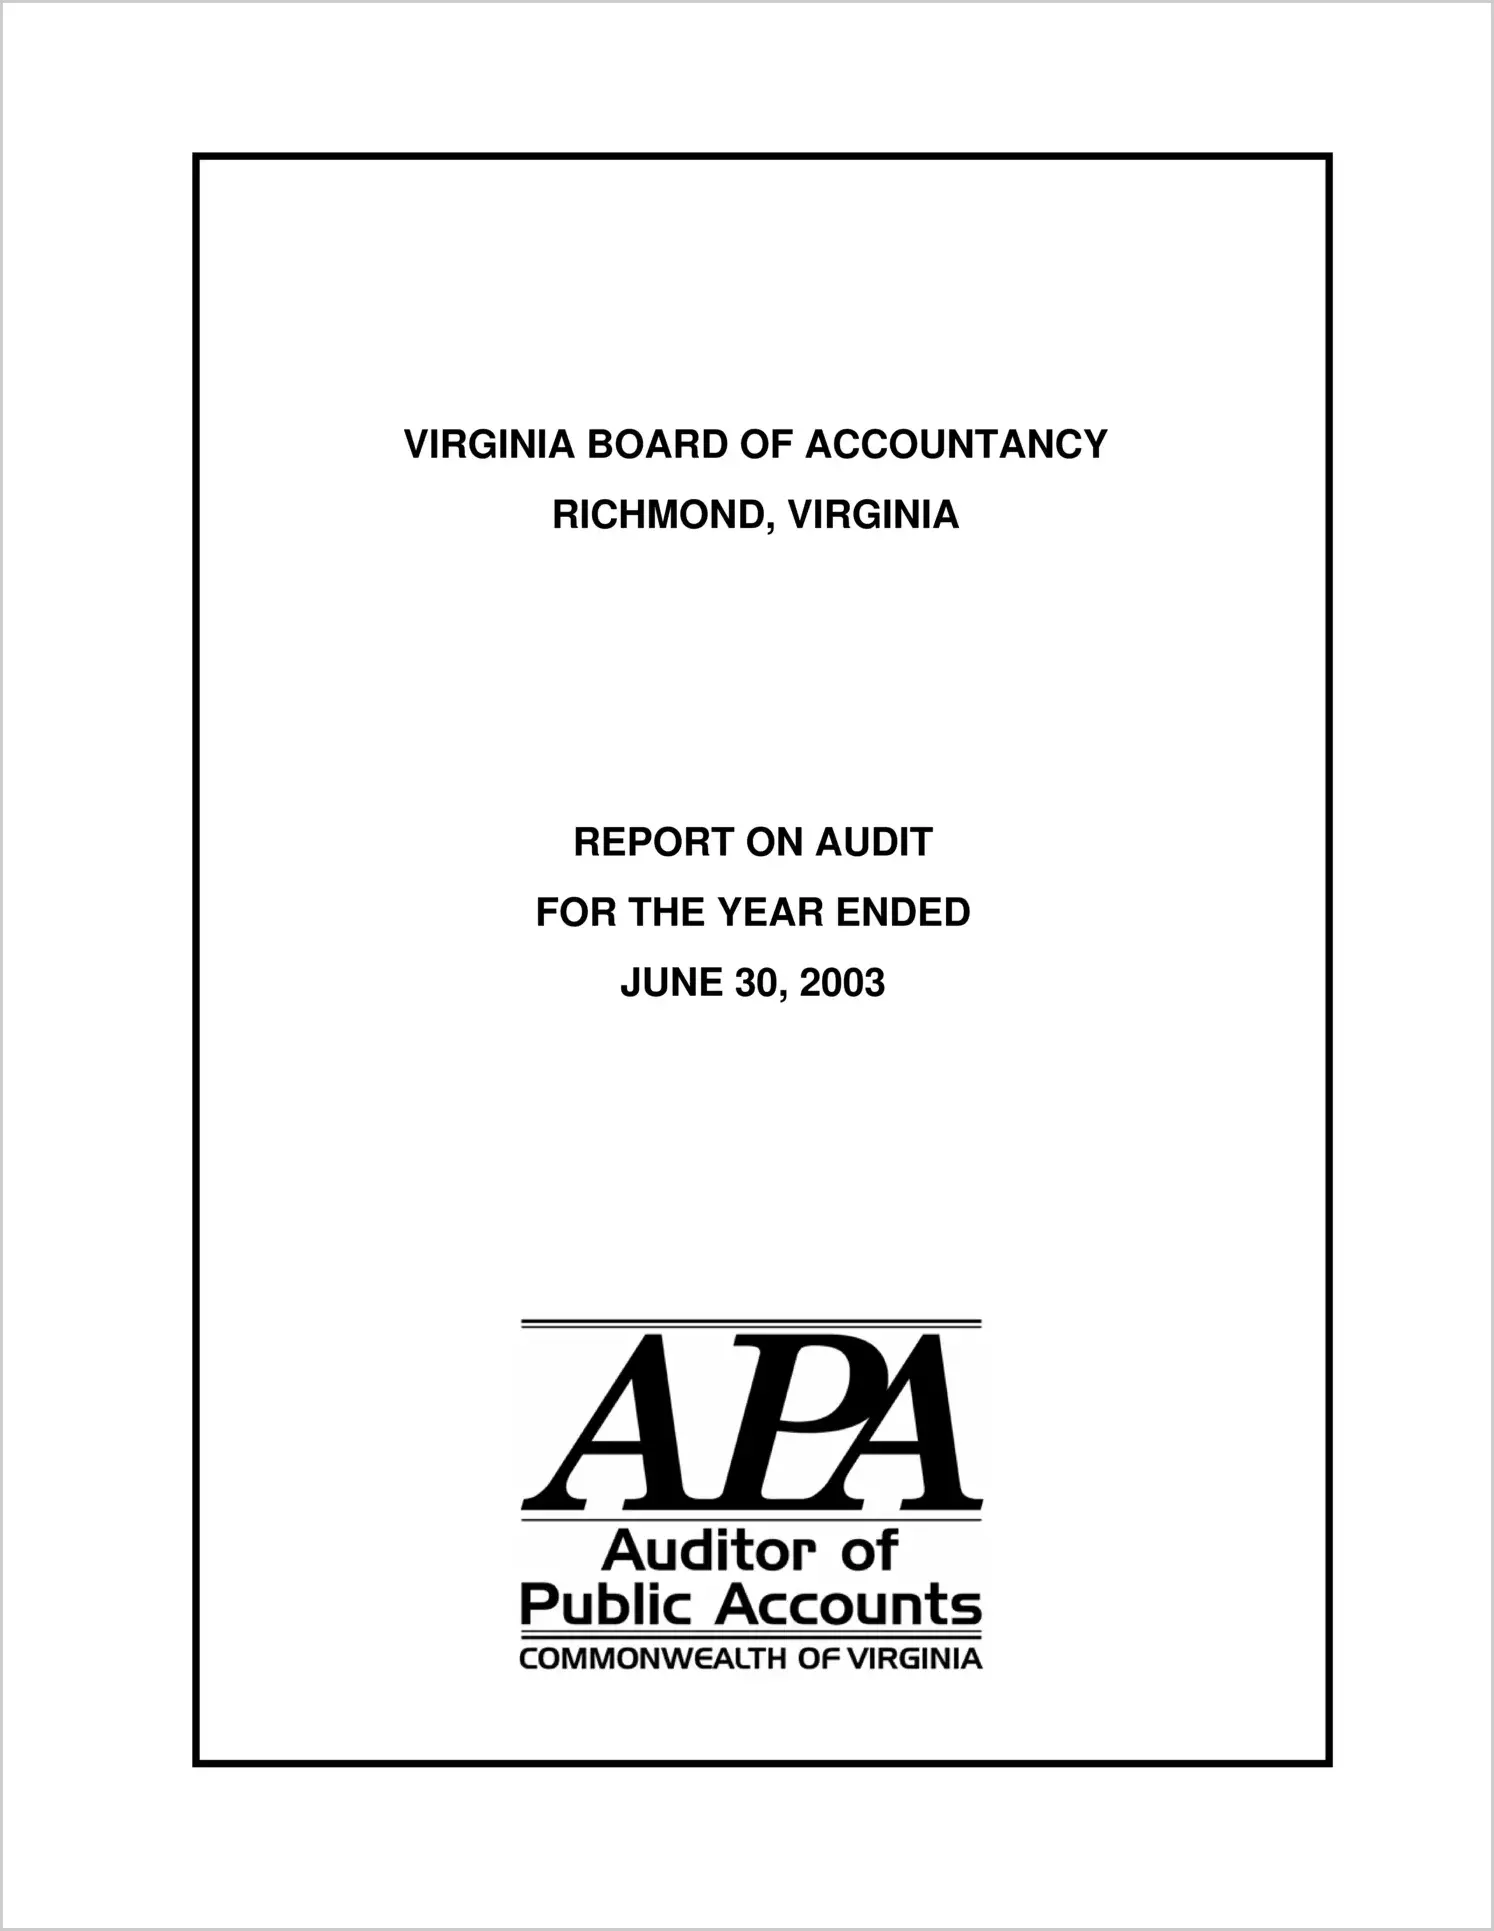 Virginia Board of Accountancy for the year ended June 30, 2003